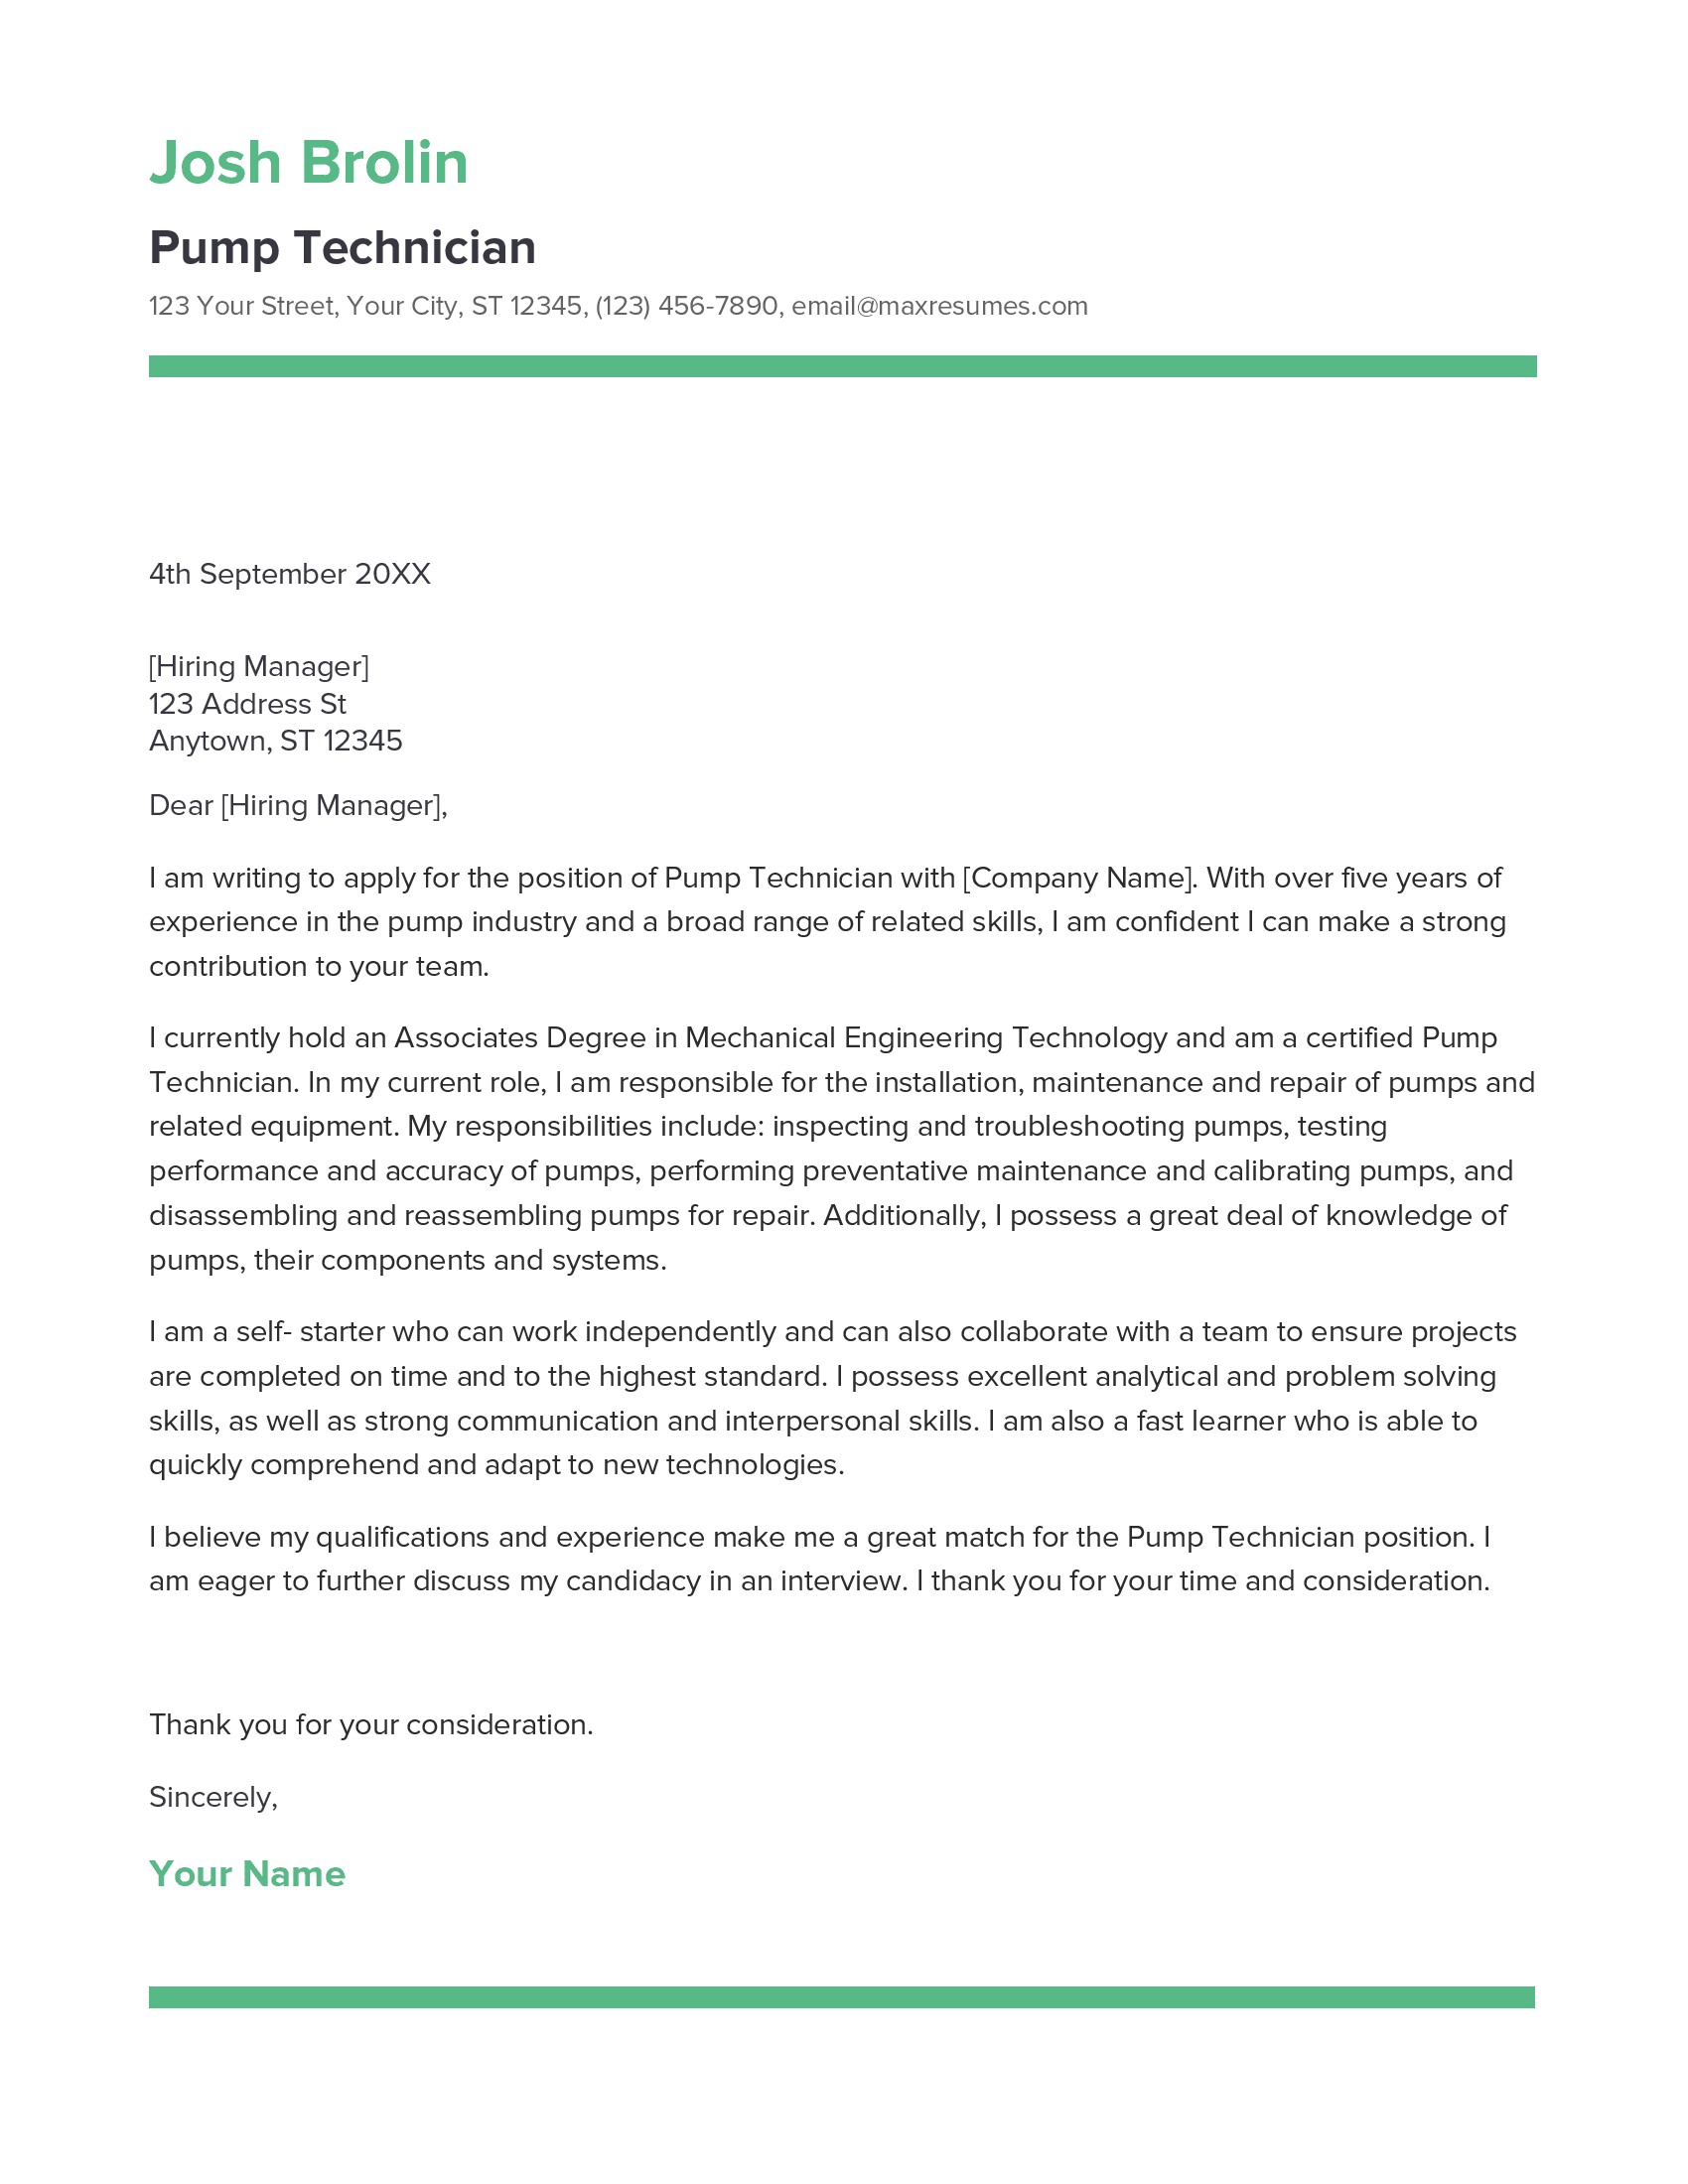 Pump Technician Cover Letter Example